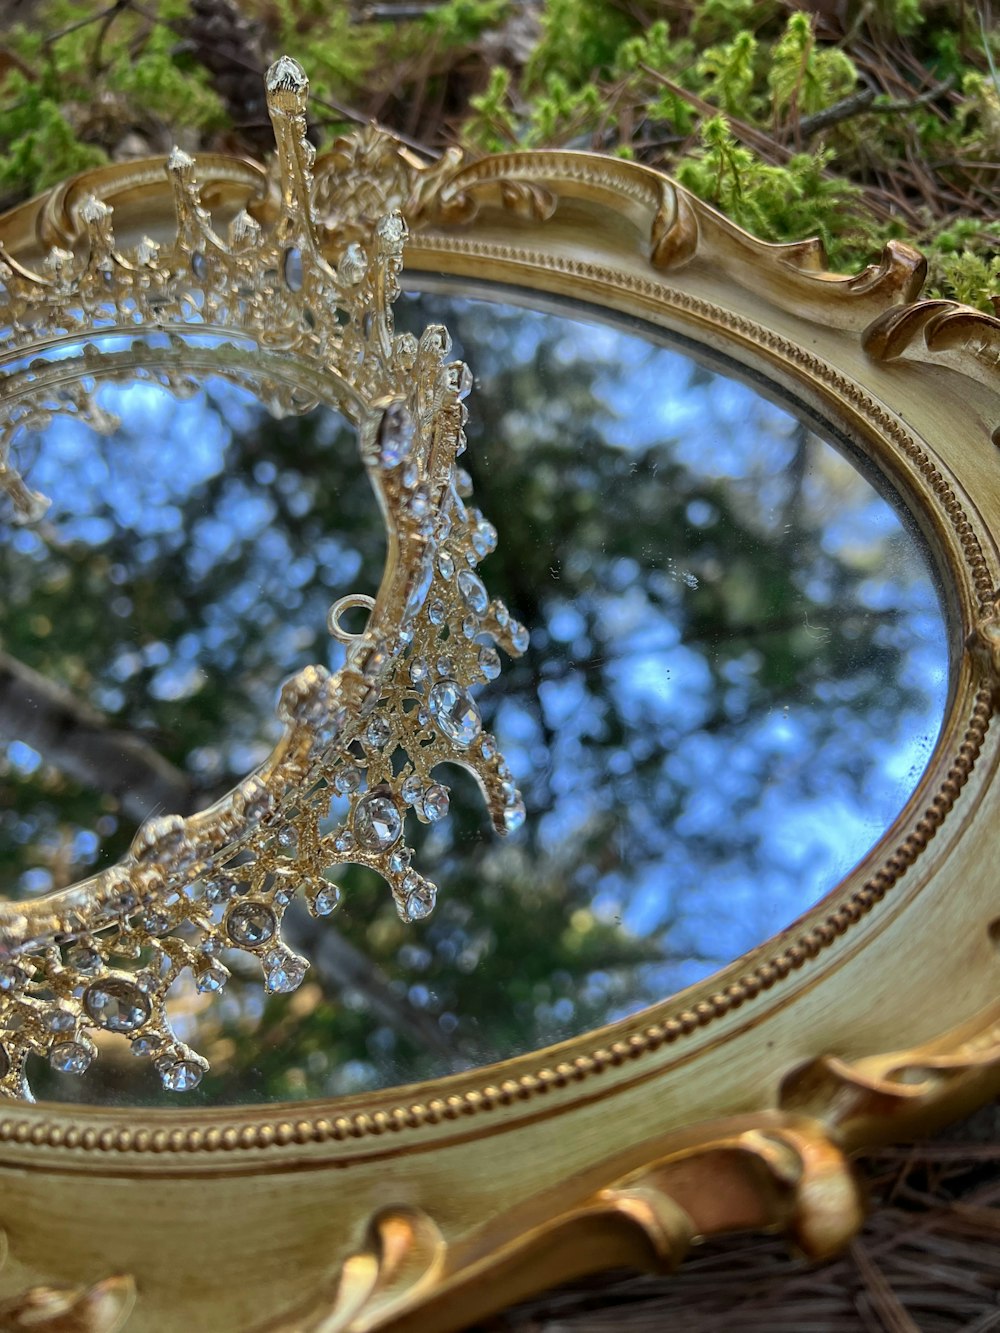 A mirror that is sitting on the ground photo – Free Maine Image on Unsplash